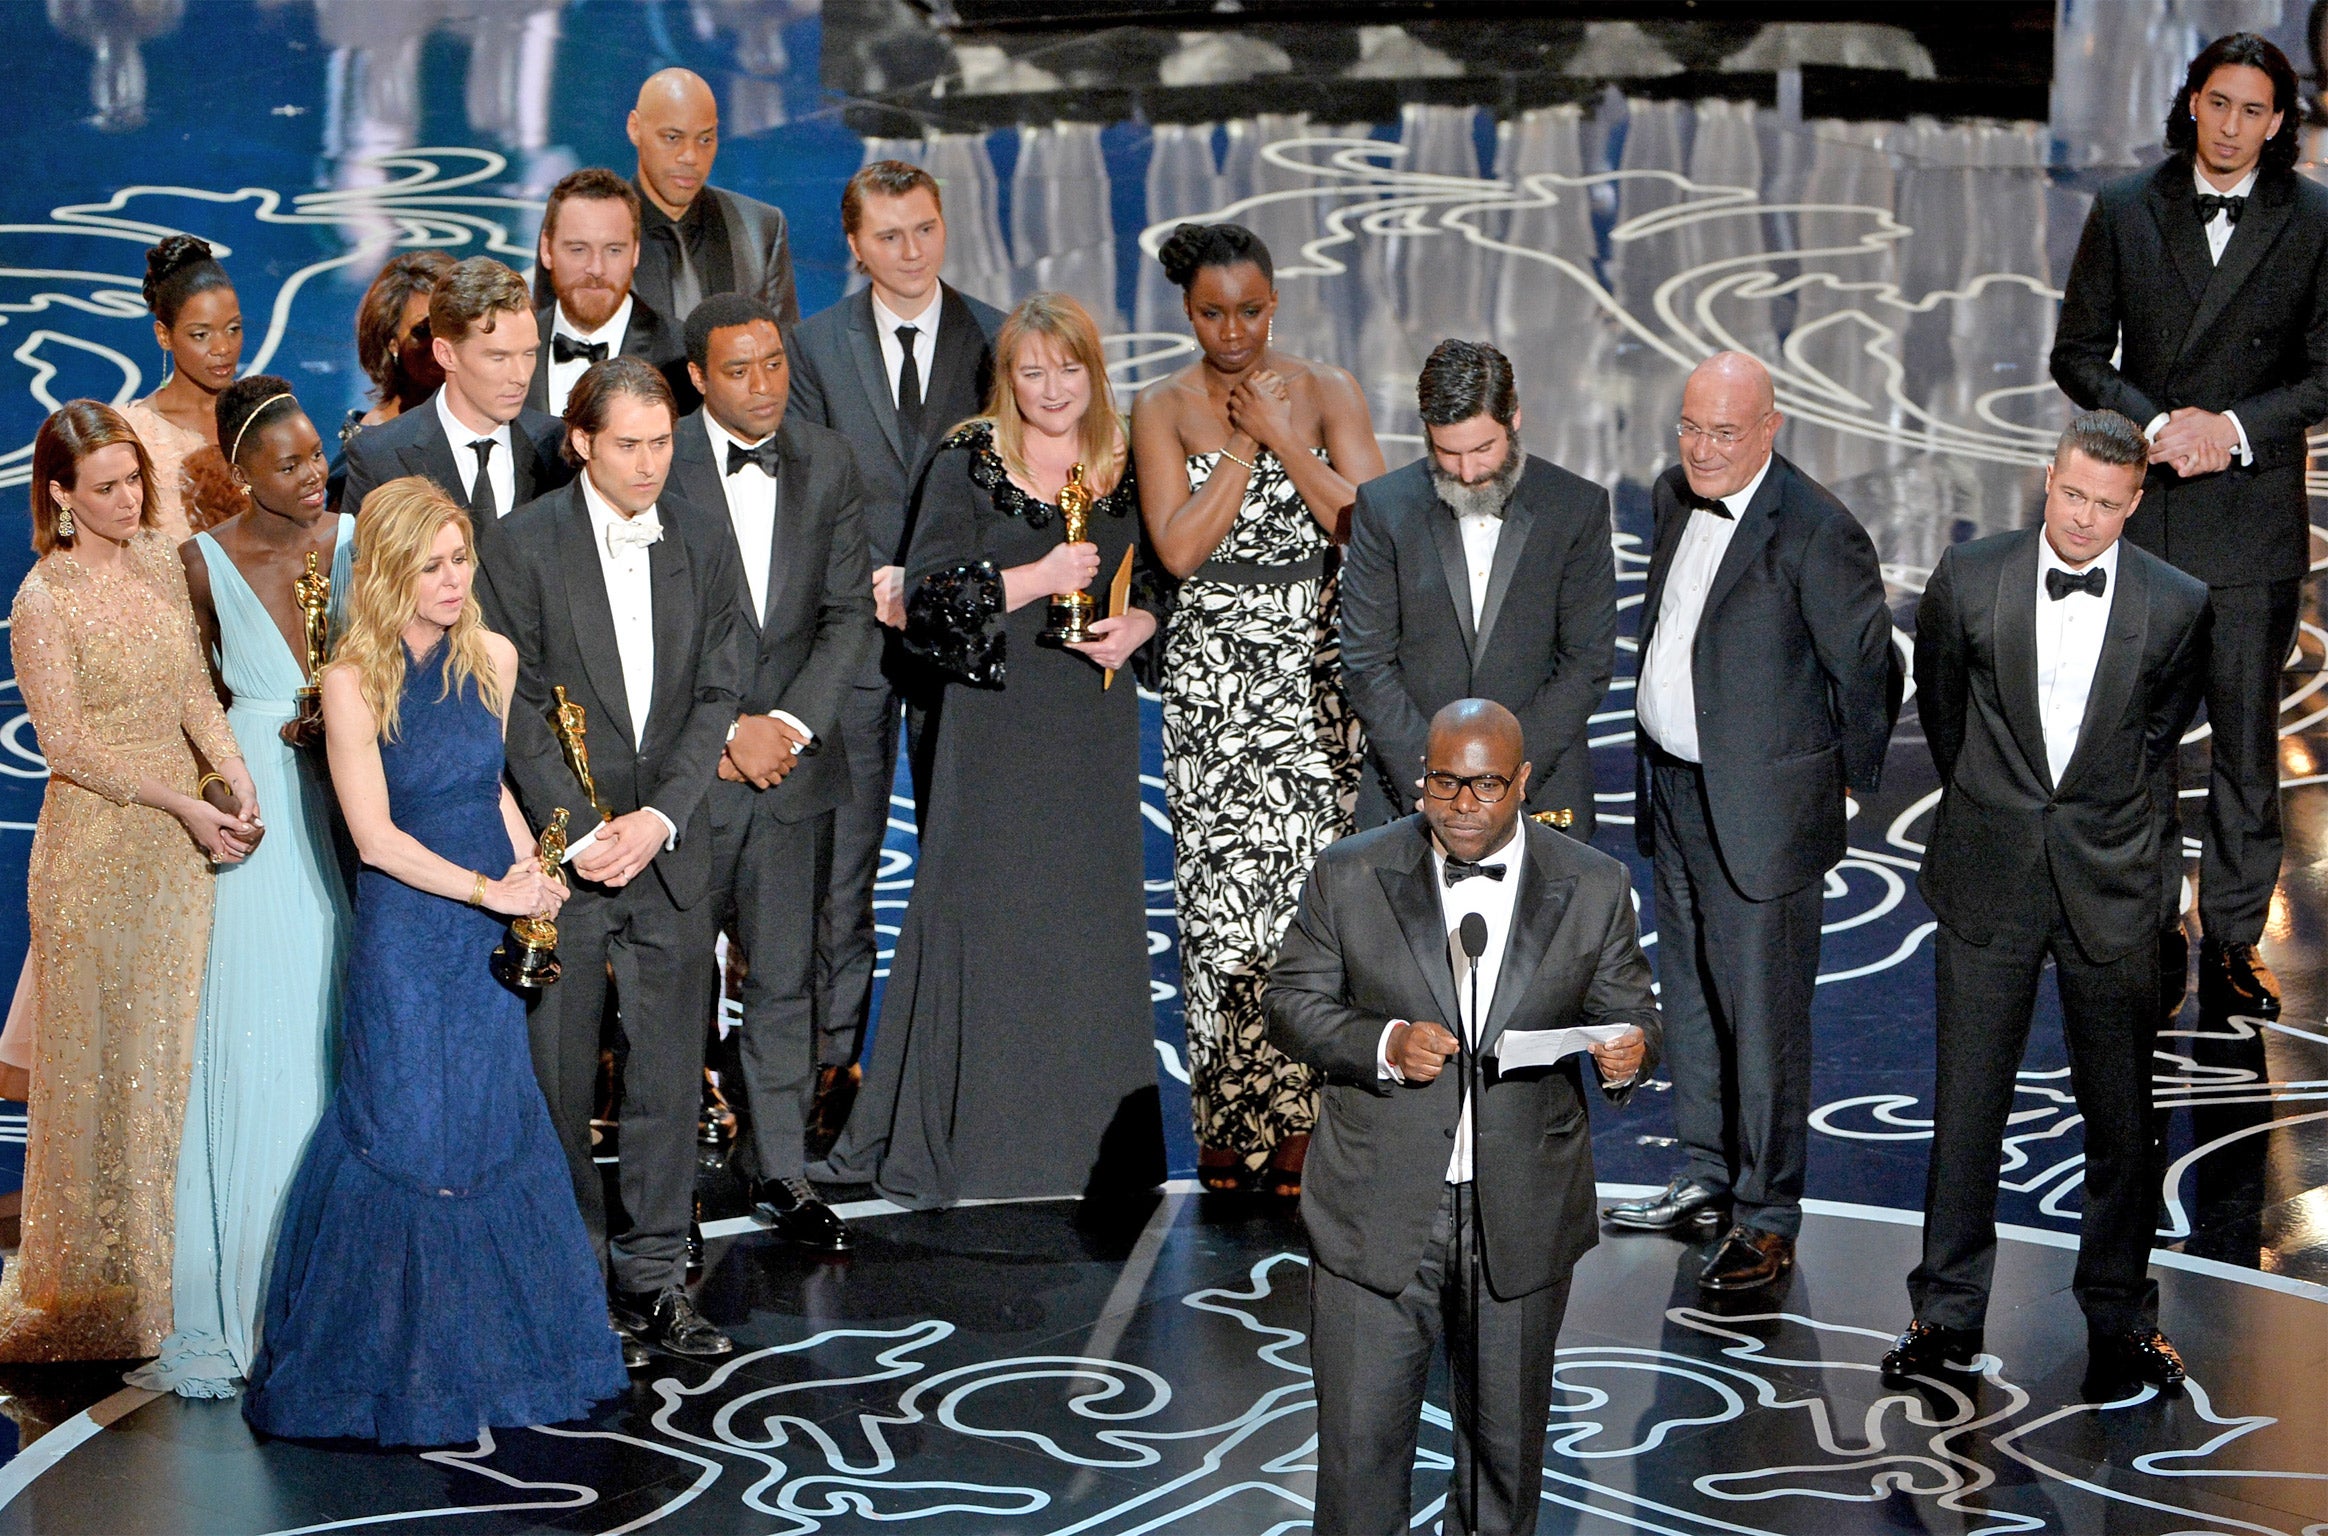 ‘12 Years A Slave’ director Steve McQueen accepts his award for Best Picture at the Oscars. Screenwriter John Ridley can be seen at the very back, behind actor Chiwetel Ejiofor